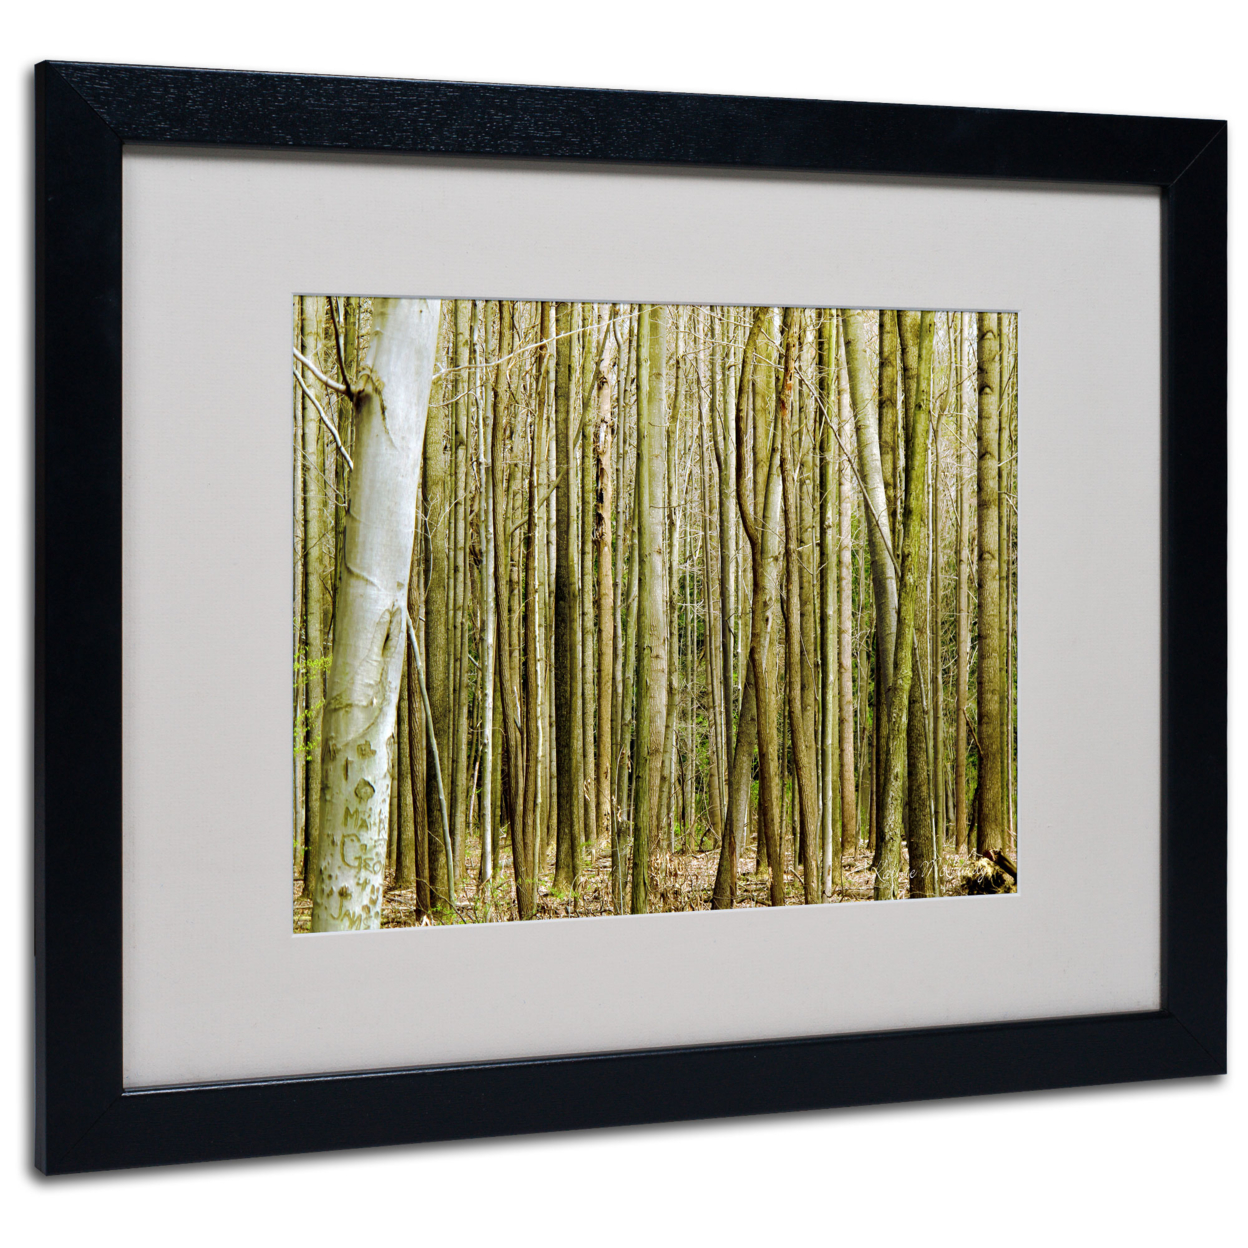 Kathie McCurdy 'Forest Floor Spring' Black Wooden Framed Art 18 X 22 Inches